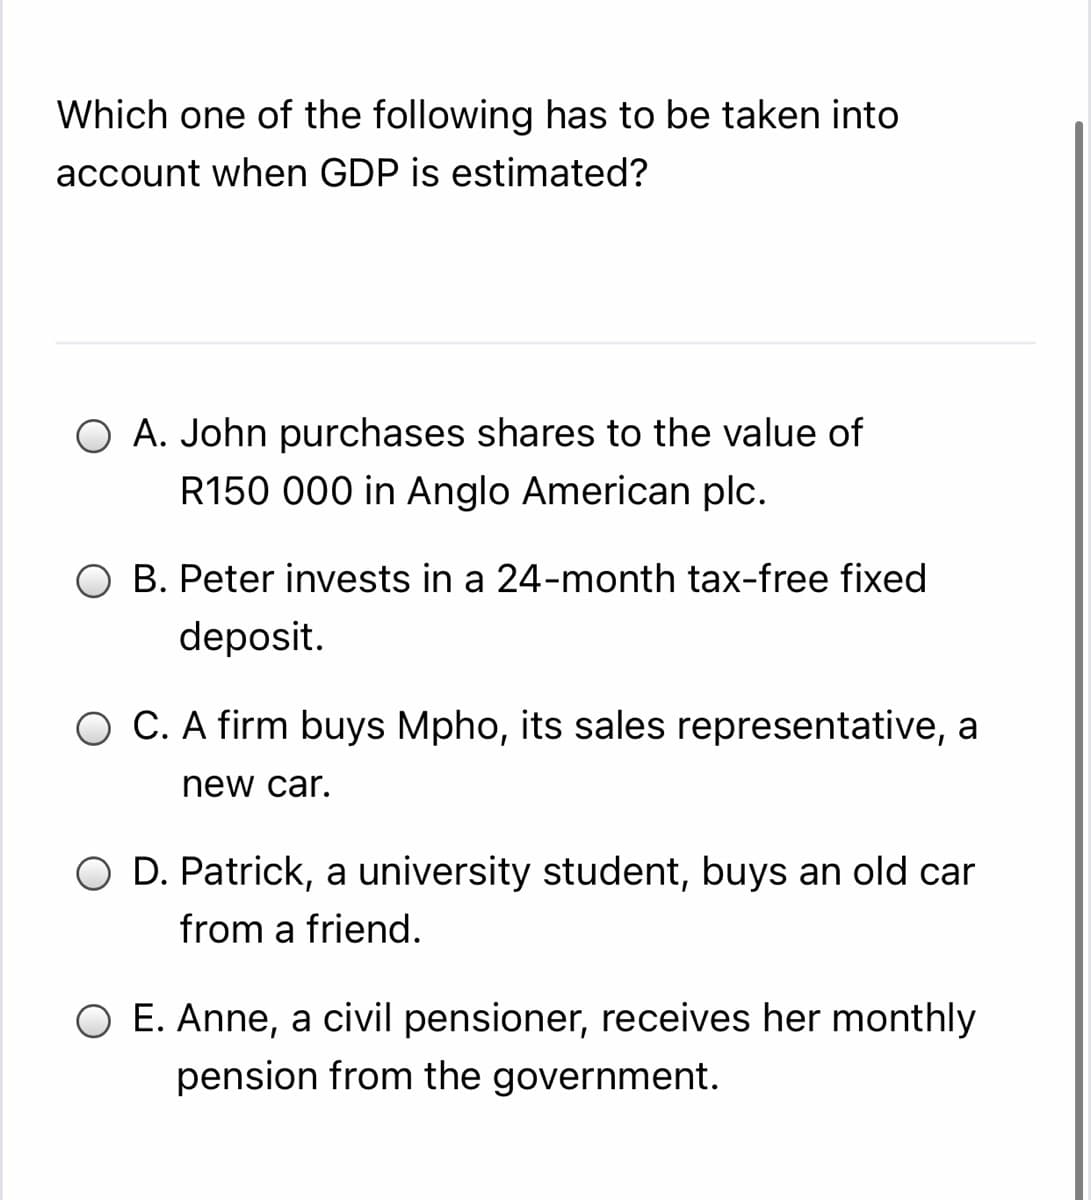 Which one of the following has to be taken into
account when GDP is estimated?
O A. John purchases shares to the value of
R150 000 in Anglo American plc.
O B. Peter invests in a 24-month tax-free fixed
deposit.
O C. A firm buys Mpho, its sales representative, a
new car.
O D. Patrick, a university student, buys an old car
from a friend.
O E. Anne, a civil pensioner, receives her monthly
pension from the government.
